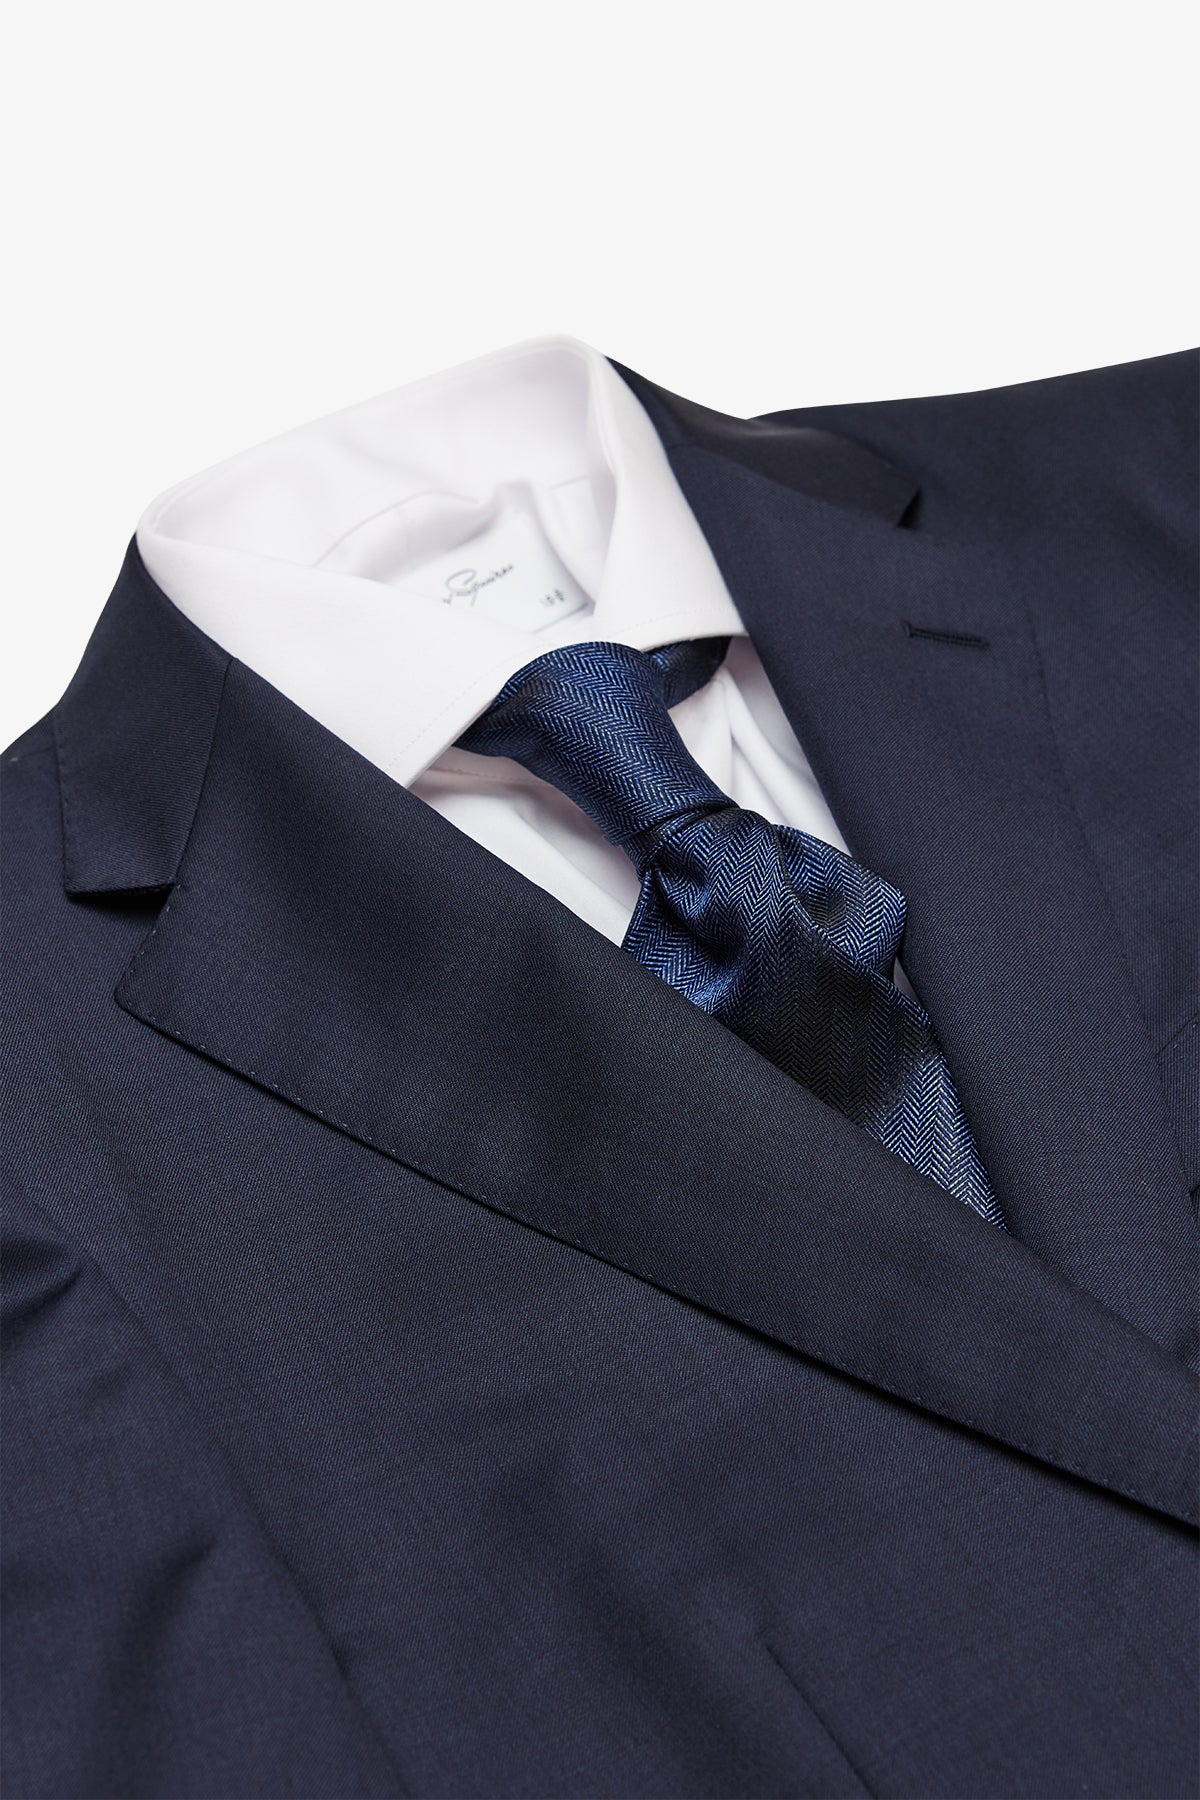 Ives - Navy Suit